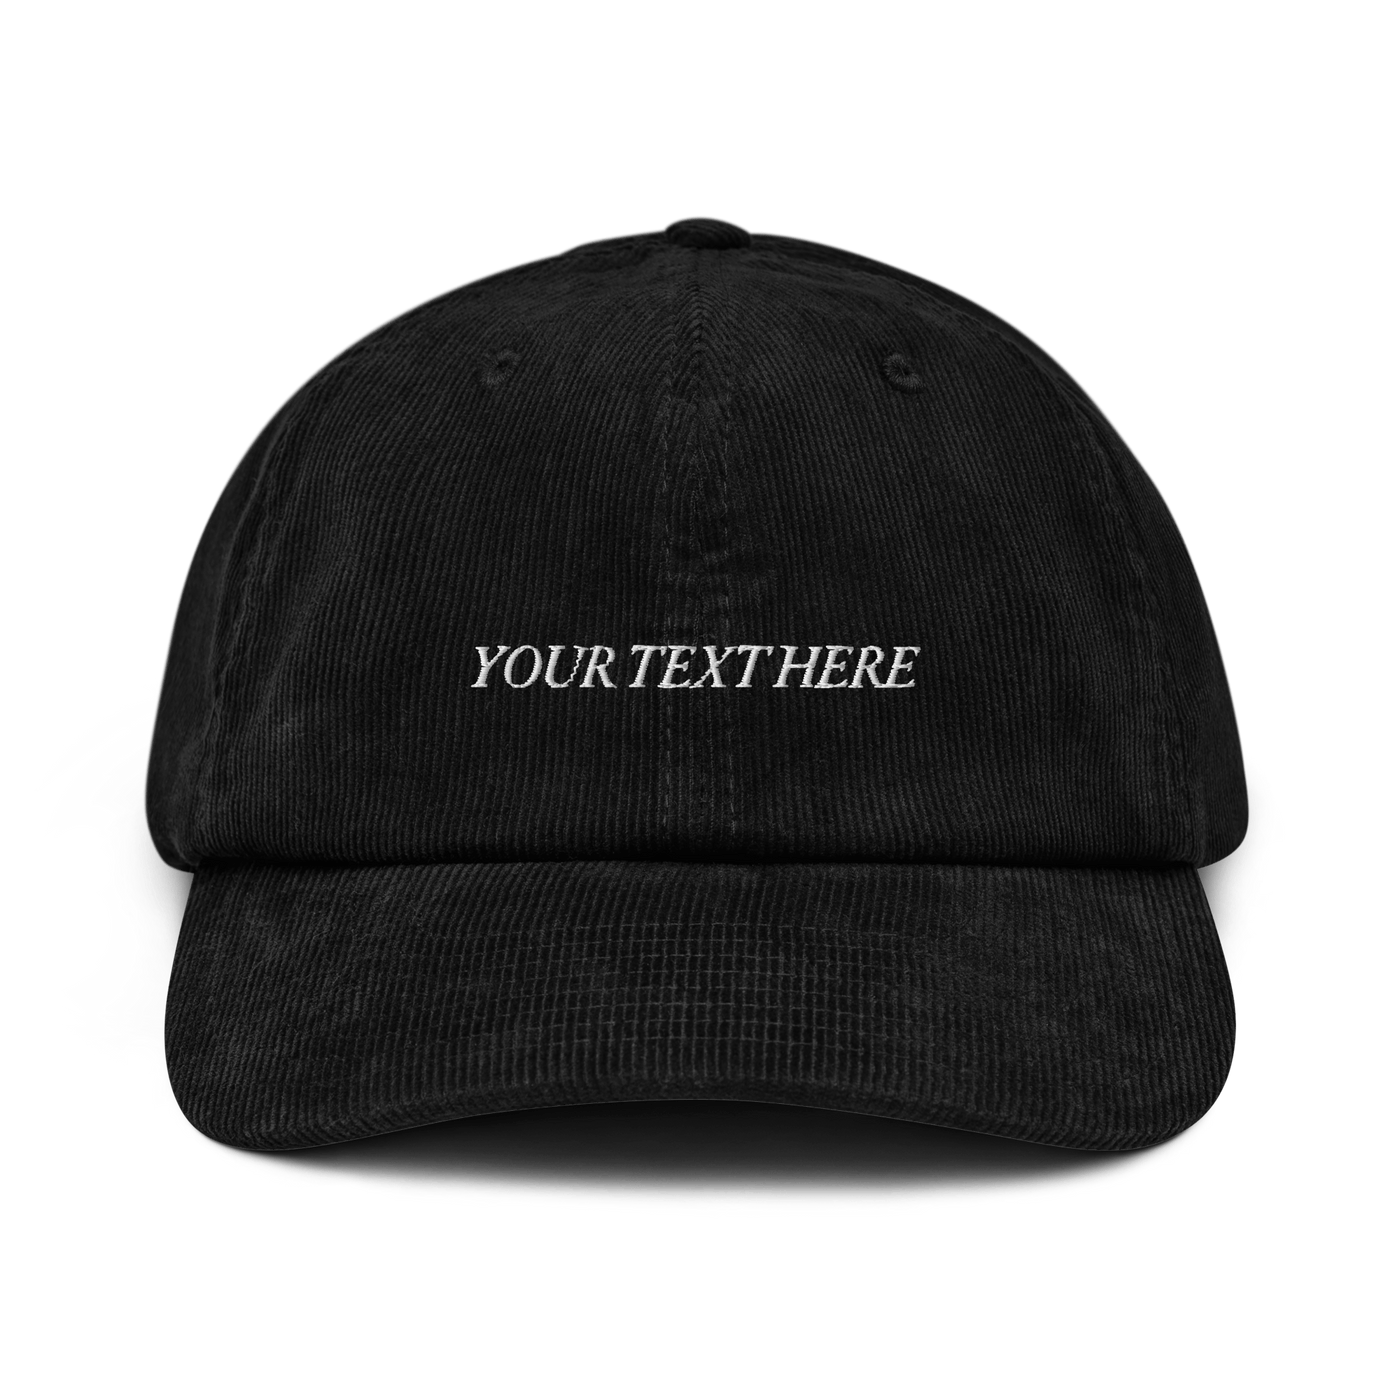 Customize Your Own Corduroy hat - Italic Font - Black - - Just Another Cap Store